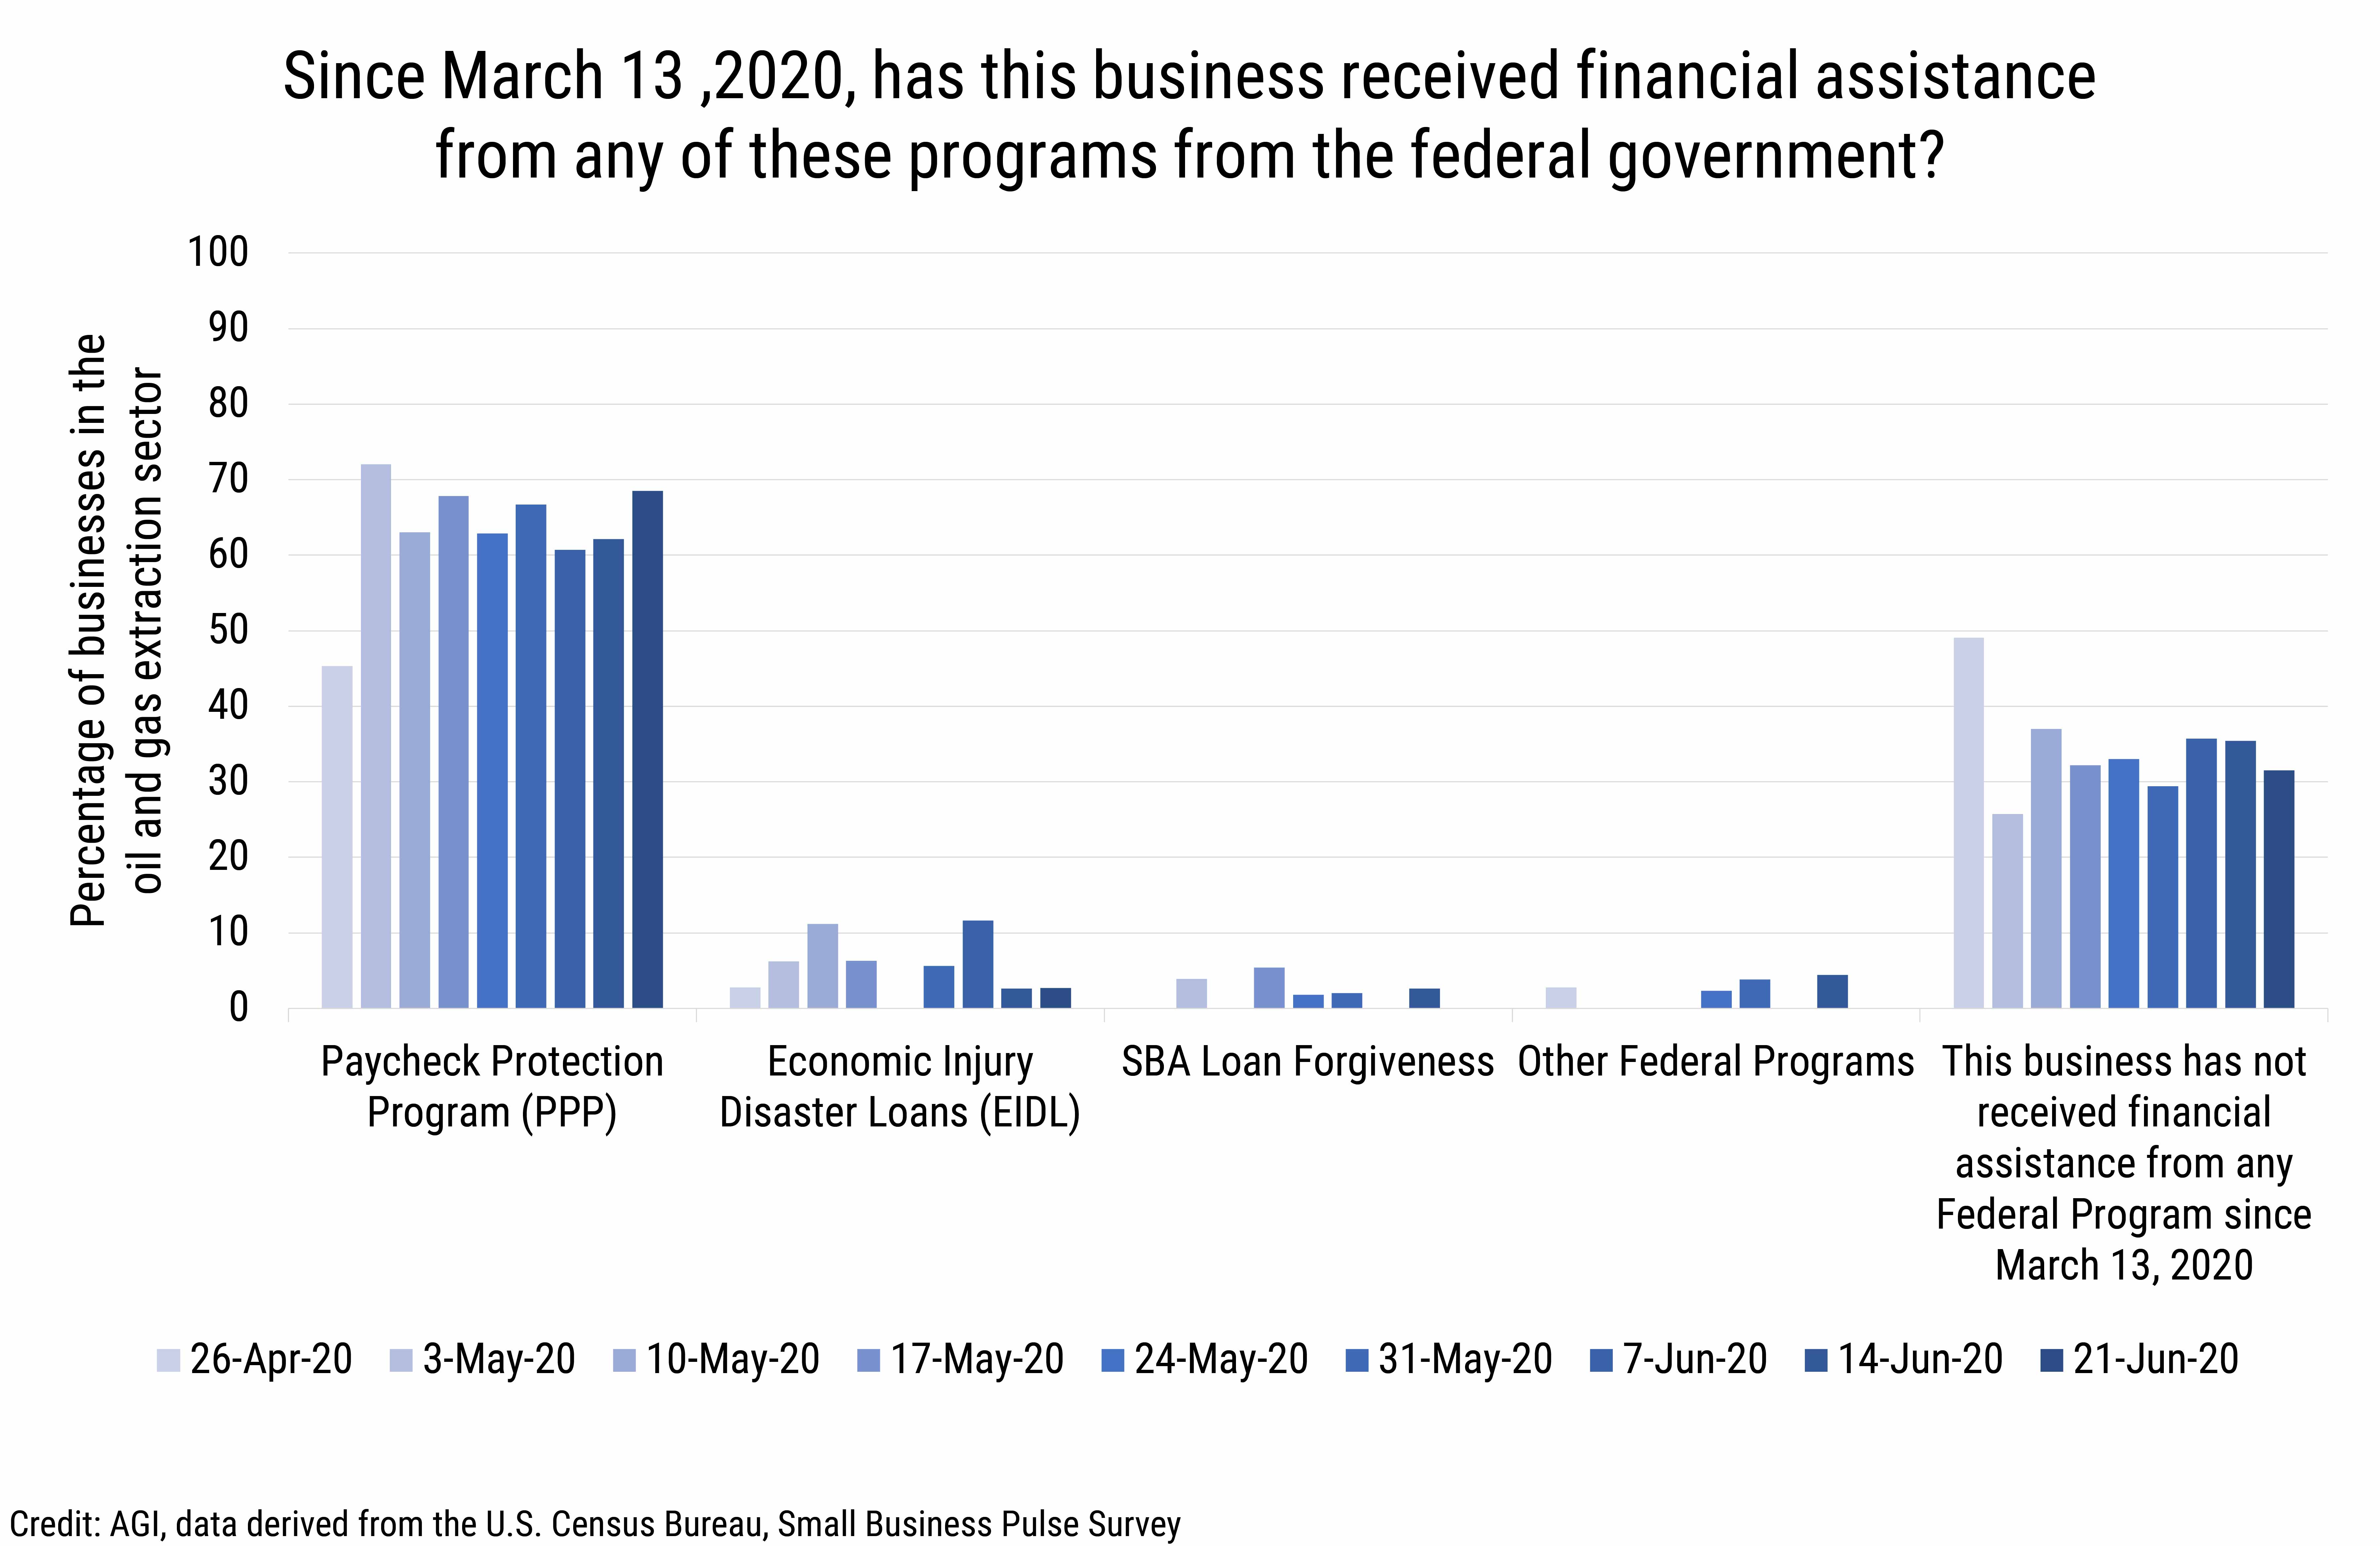 DB_2020-015_chart03 - Oil and Gas Extraction sector: Sources of receivied financial assistance (credit: AGI, data derived from the U.S. Census Bureau, Small Business Pulse Survey)